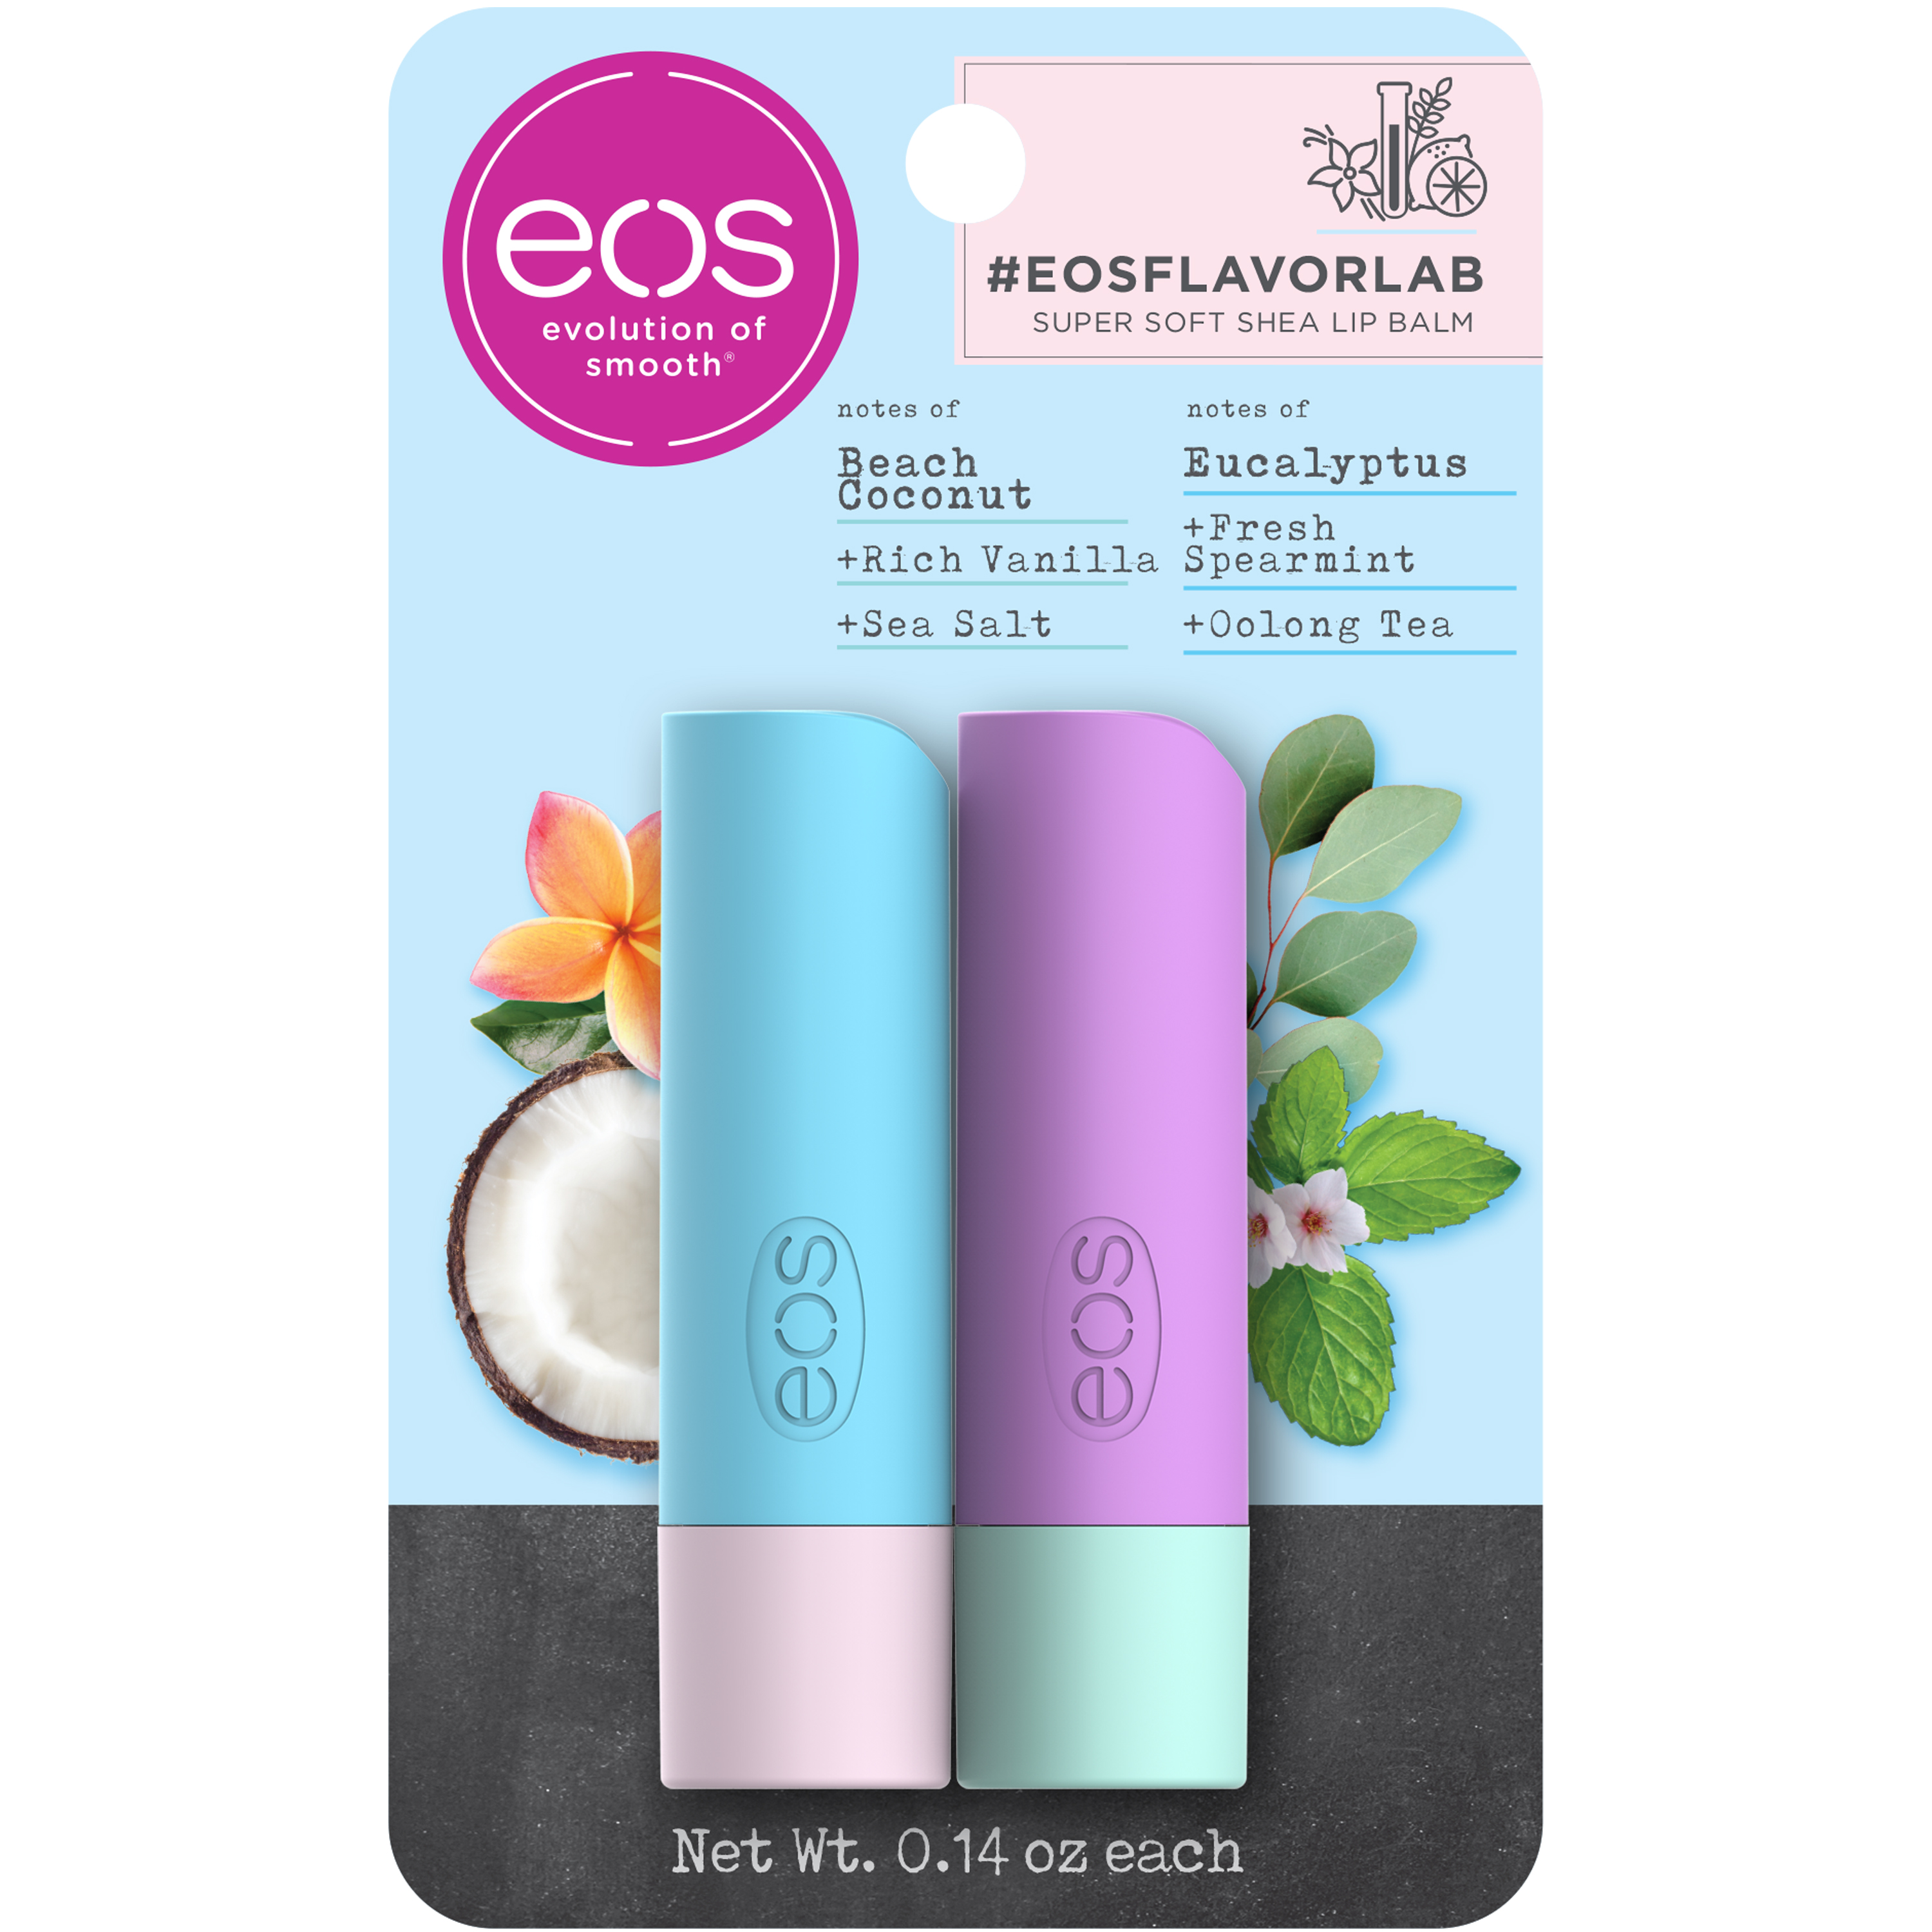 eos flavorlab Stick Lip Balm - Beach Coconut and Eucalyptus | 0.14 oz | 2-pack - image 1 of 3